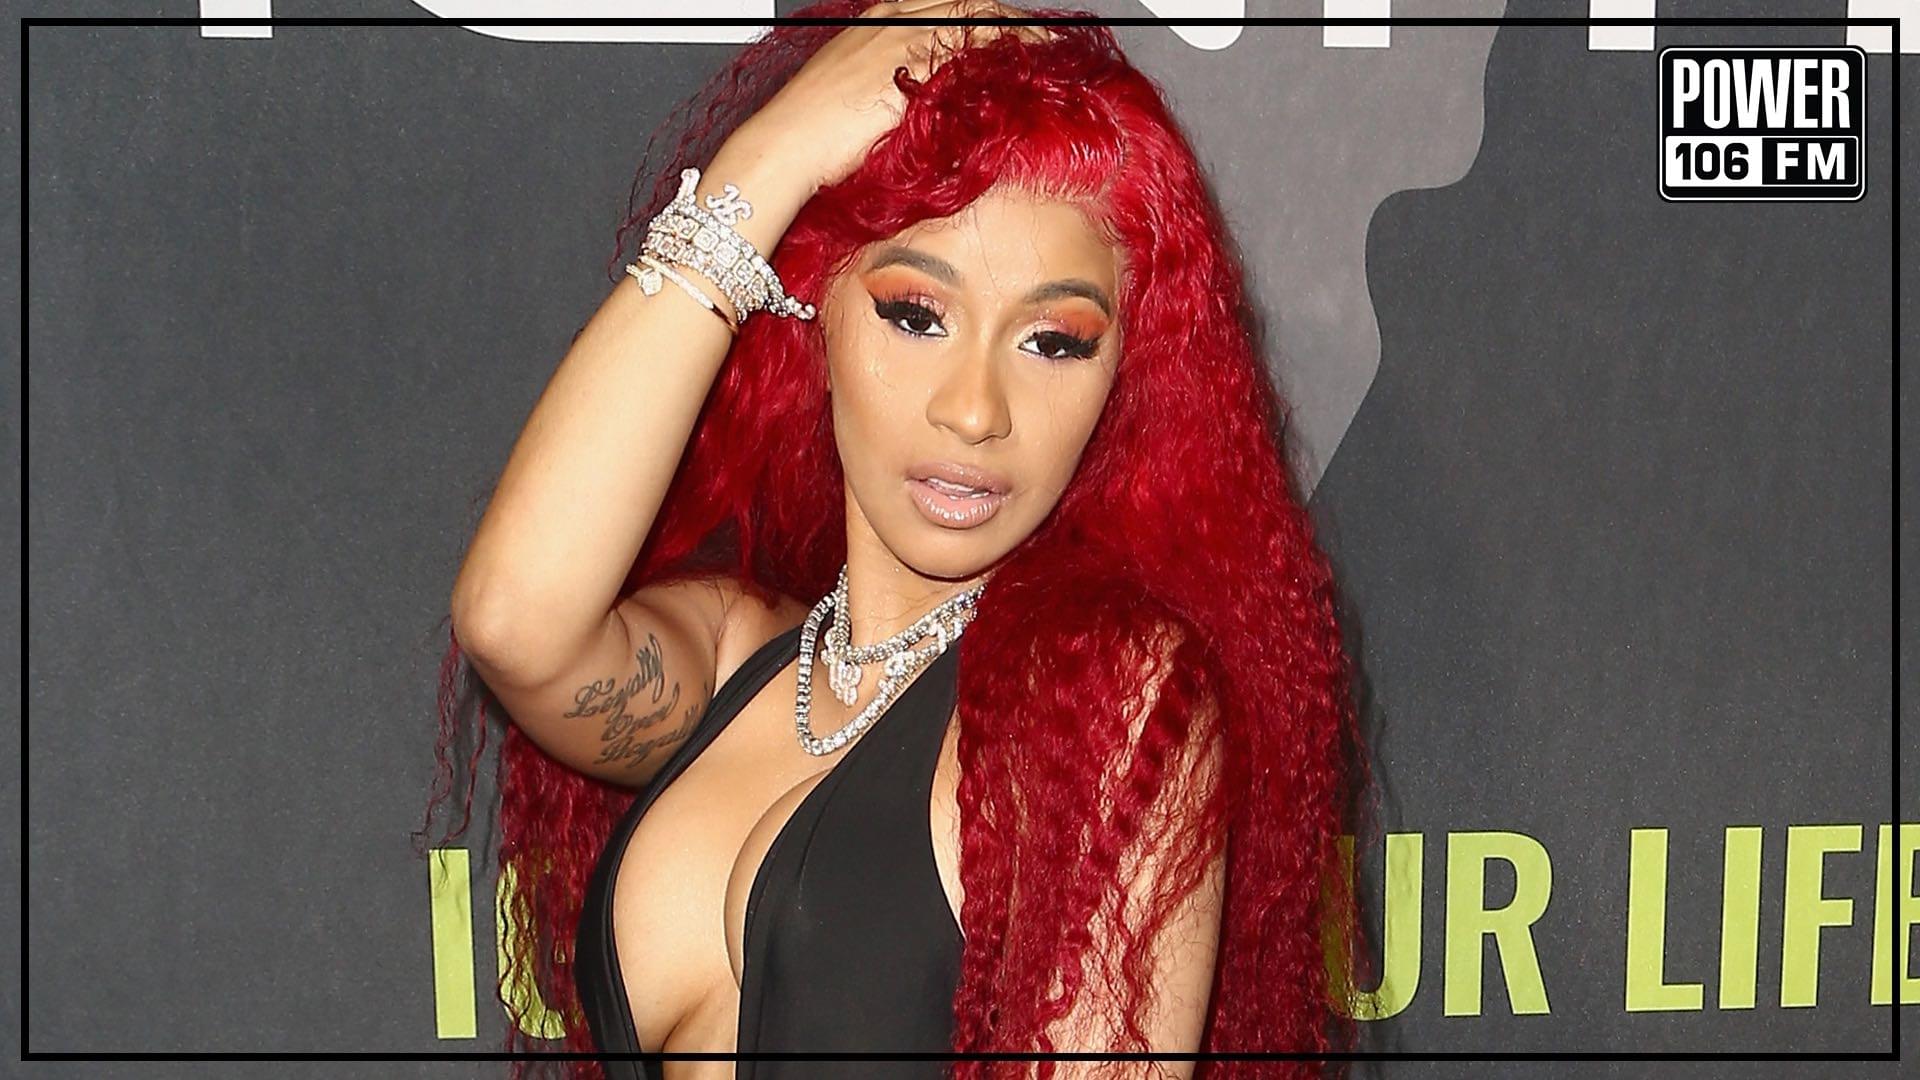 Reactions To Cardi B Video Claiming She Drugged & Robbed Men